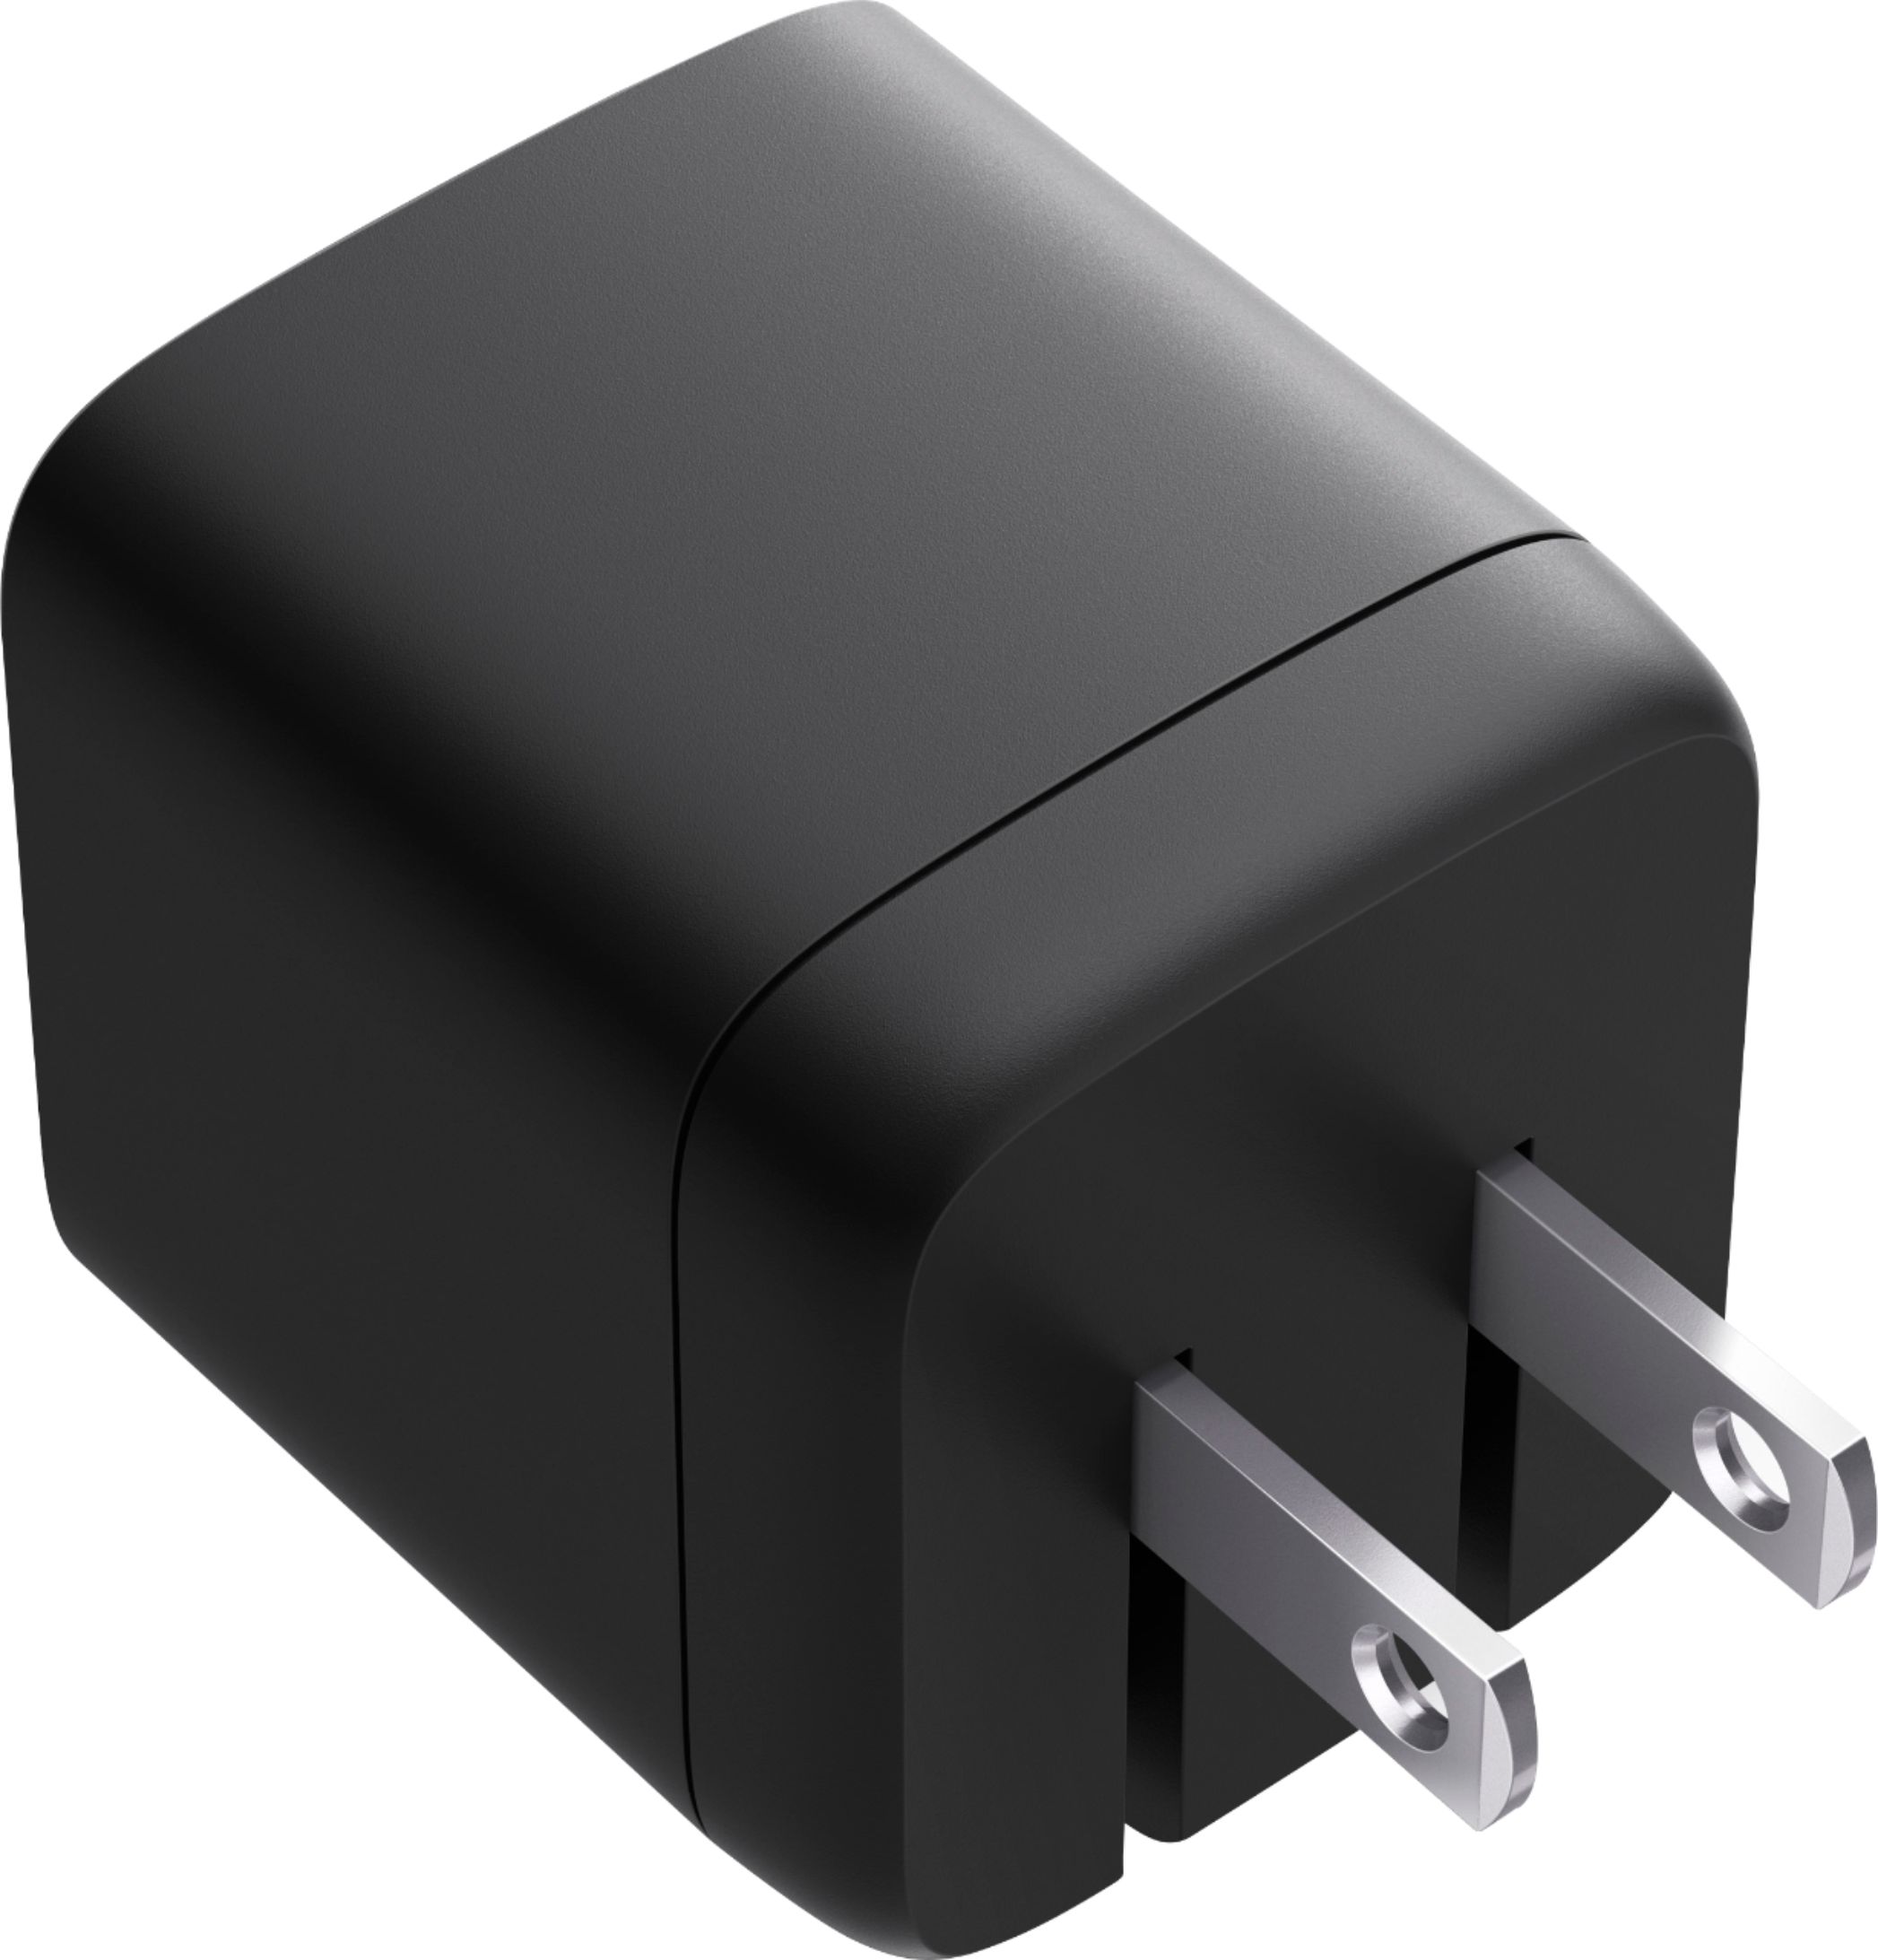 Anker Nano II 45W PPS USB-C Fast Wall Charger with GaN for Samsung Galaxy  and iPhone Black A2664J11-1 - Best Buy